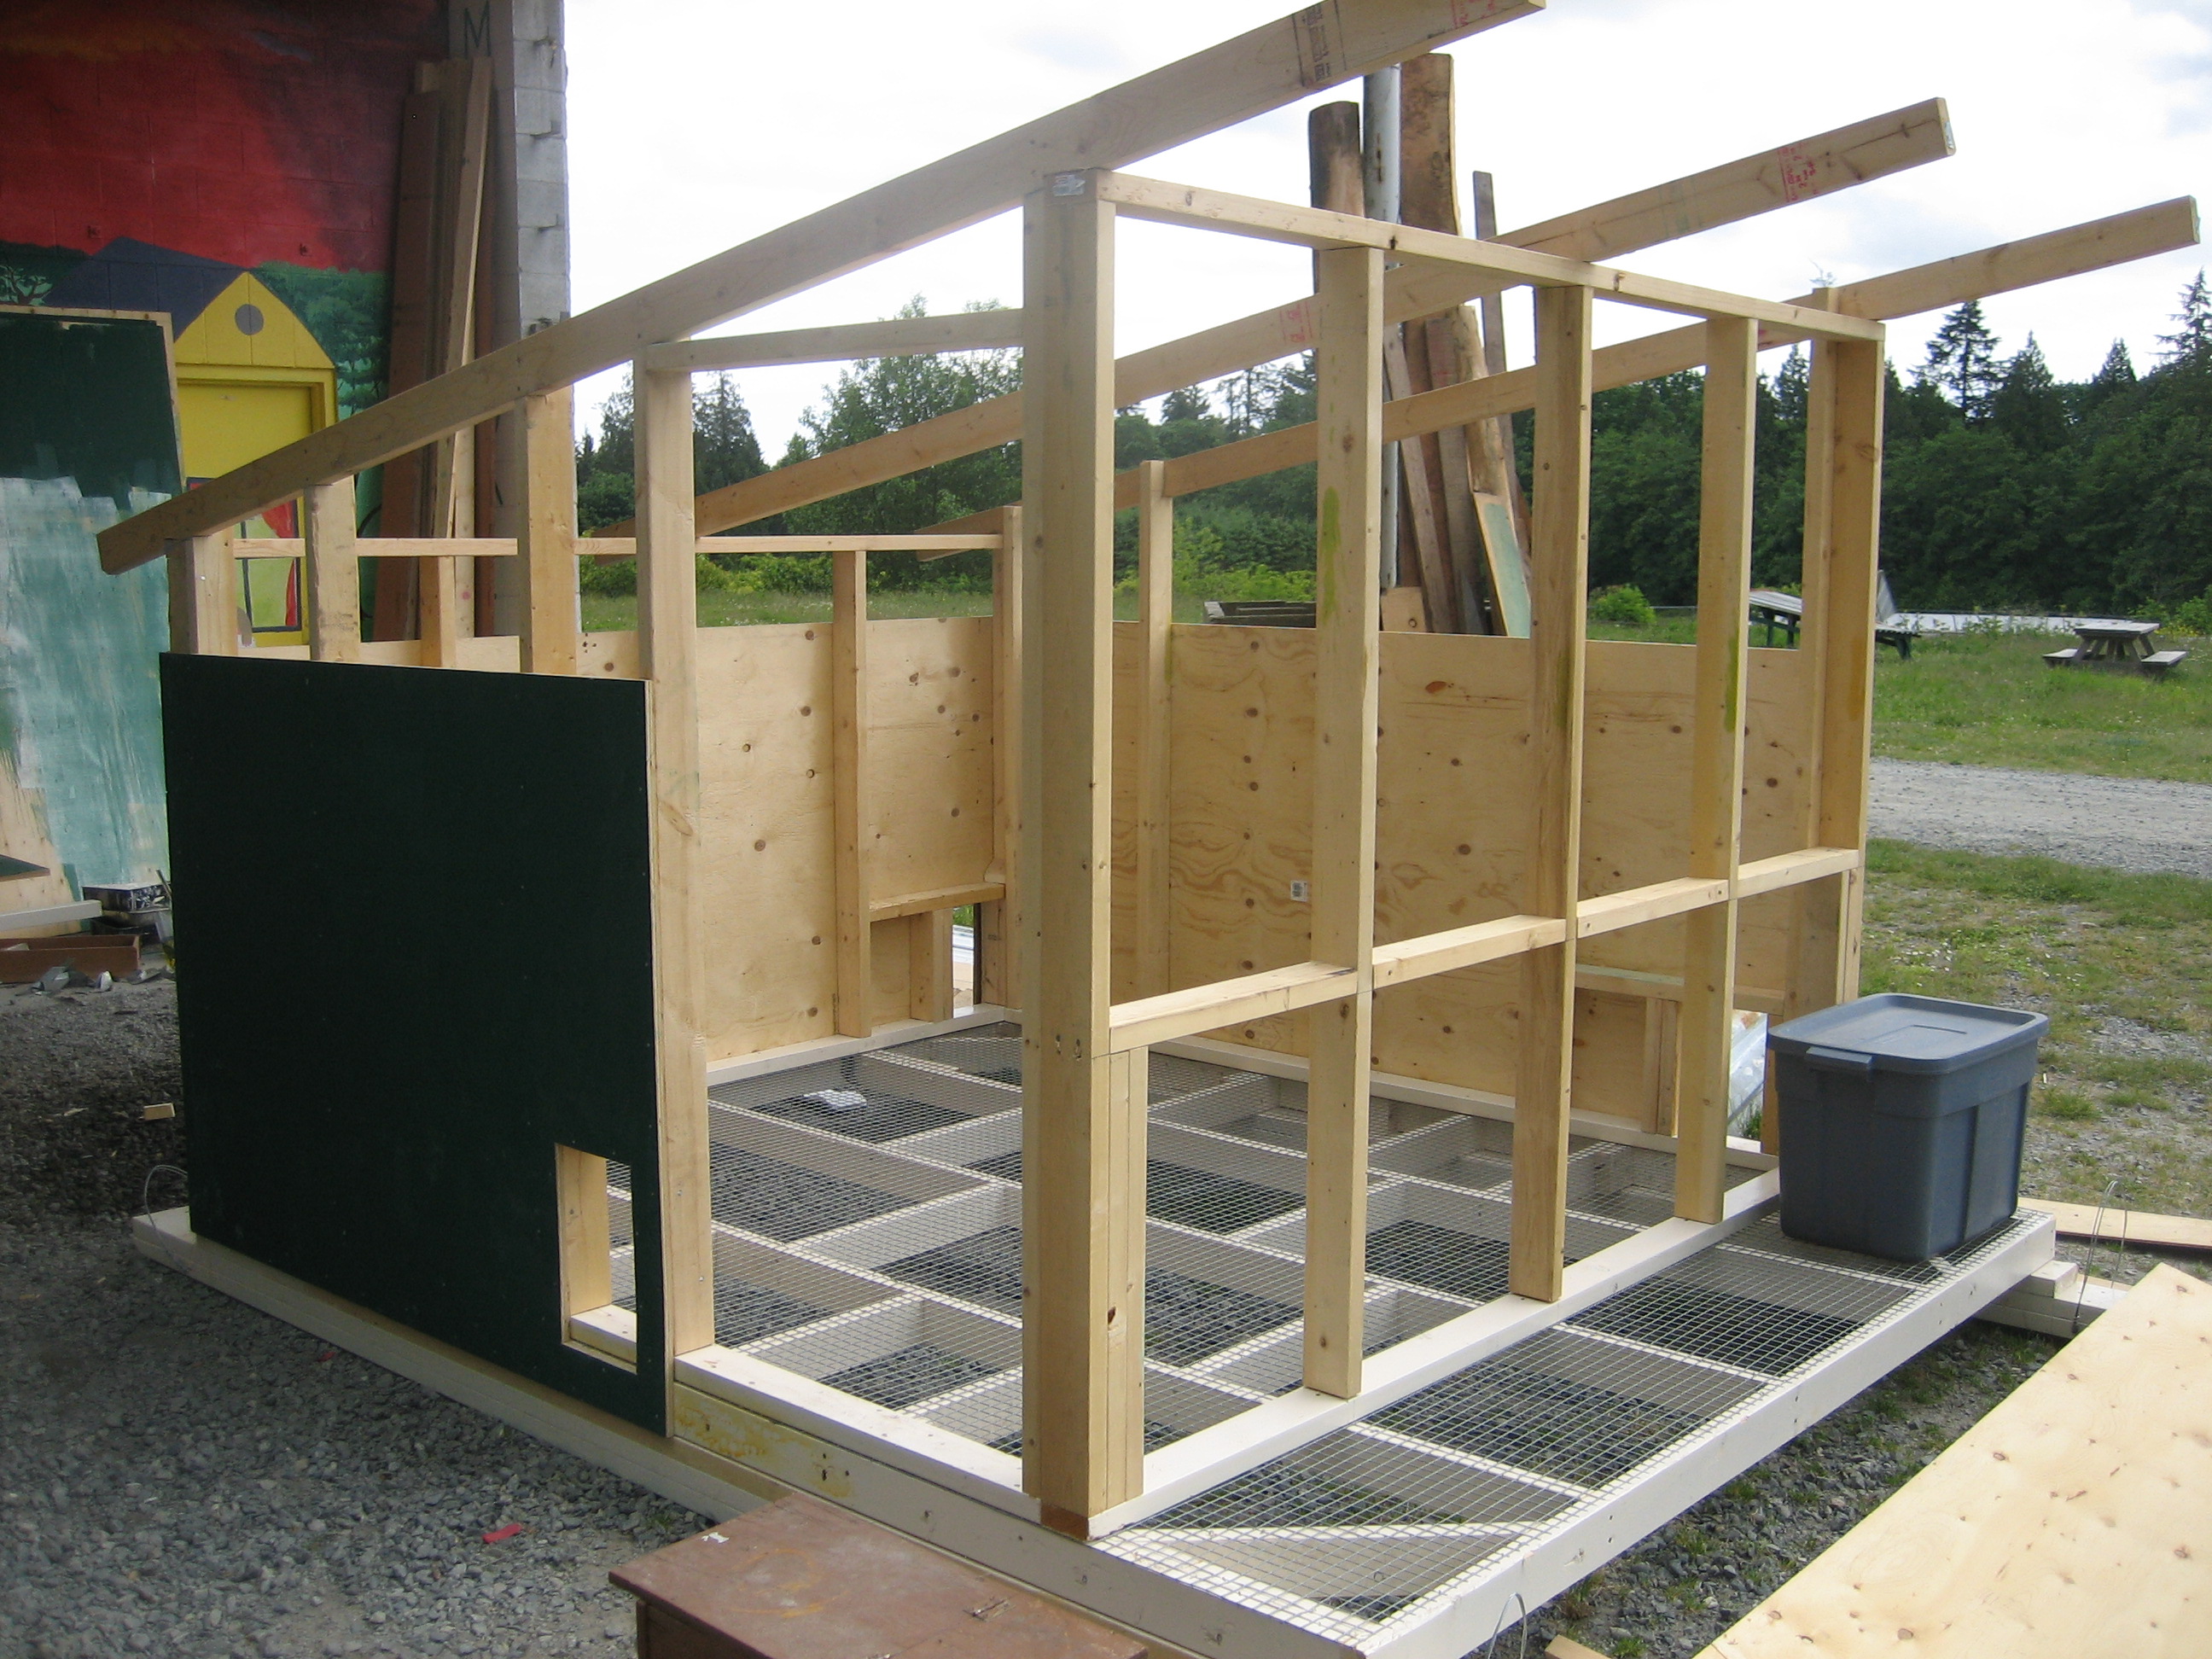 Construction plans for a Chicken Coop | New and Clever ...